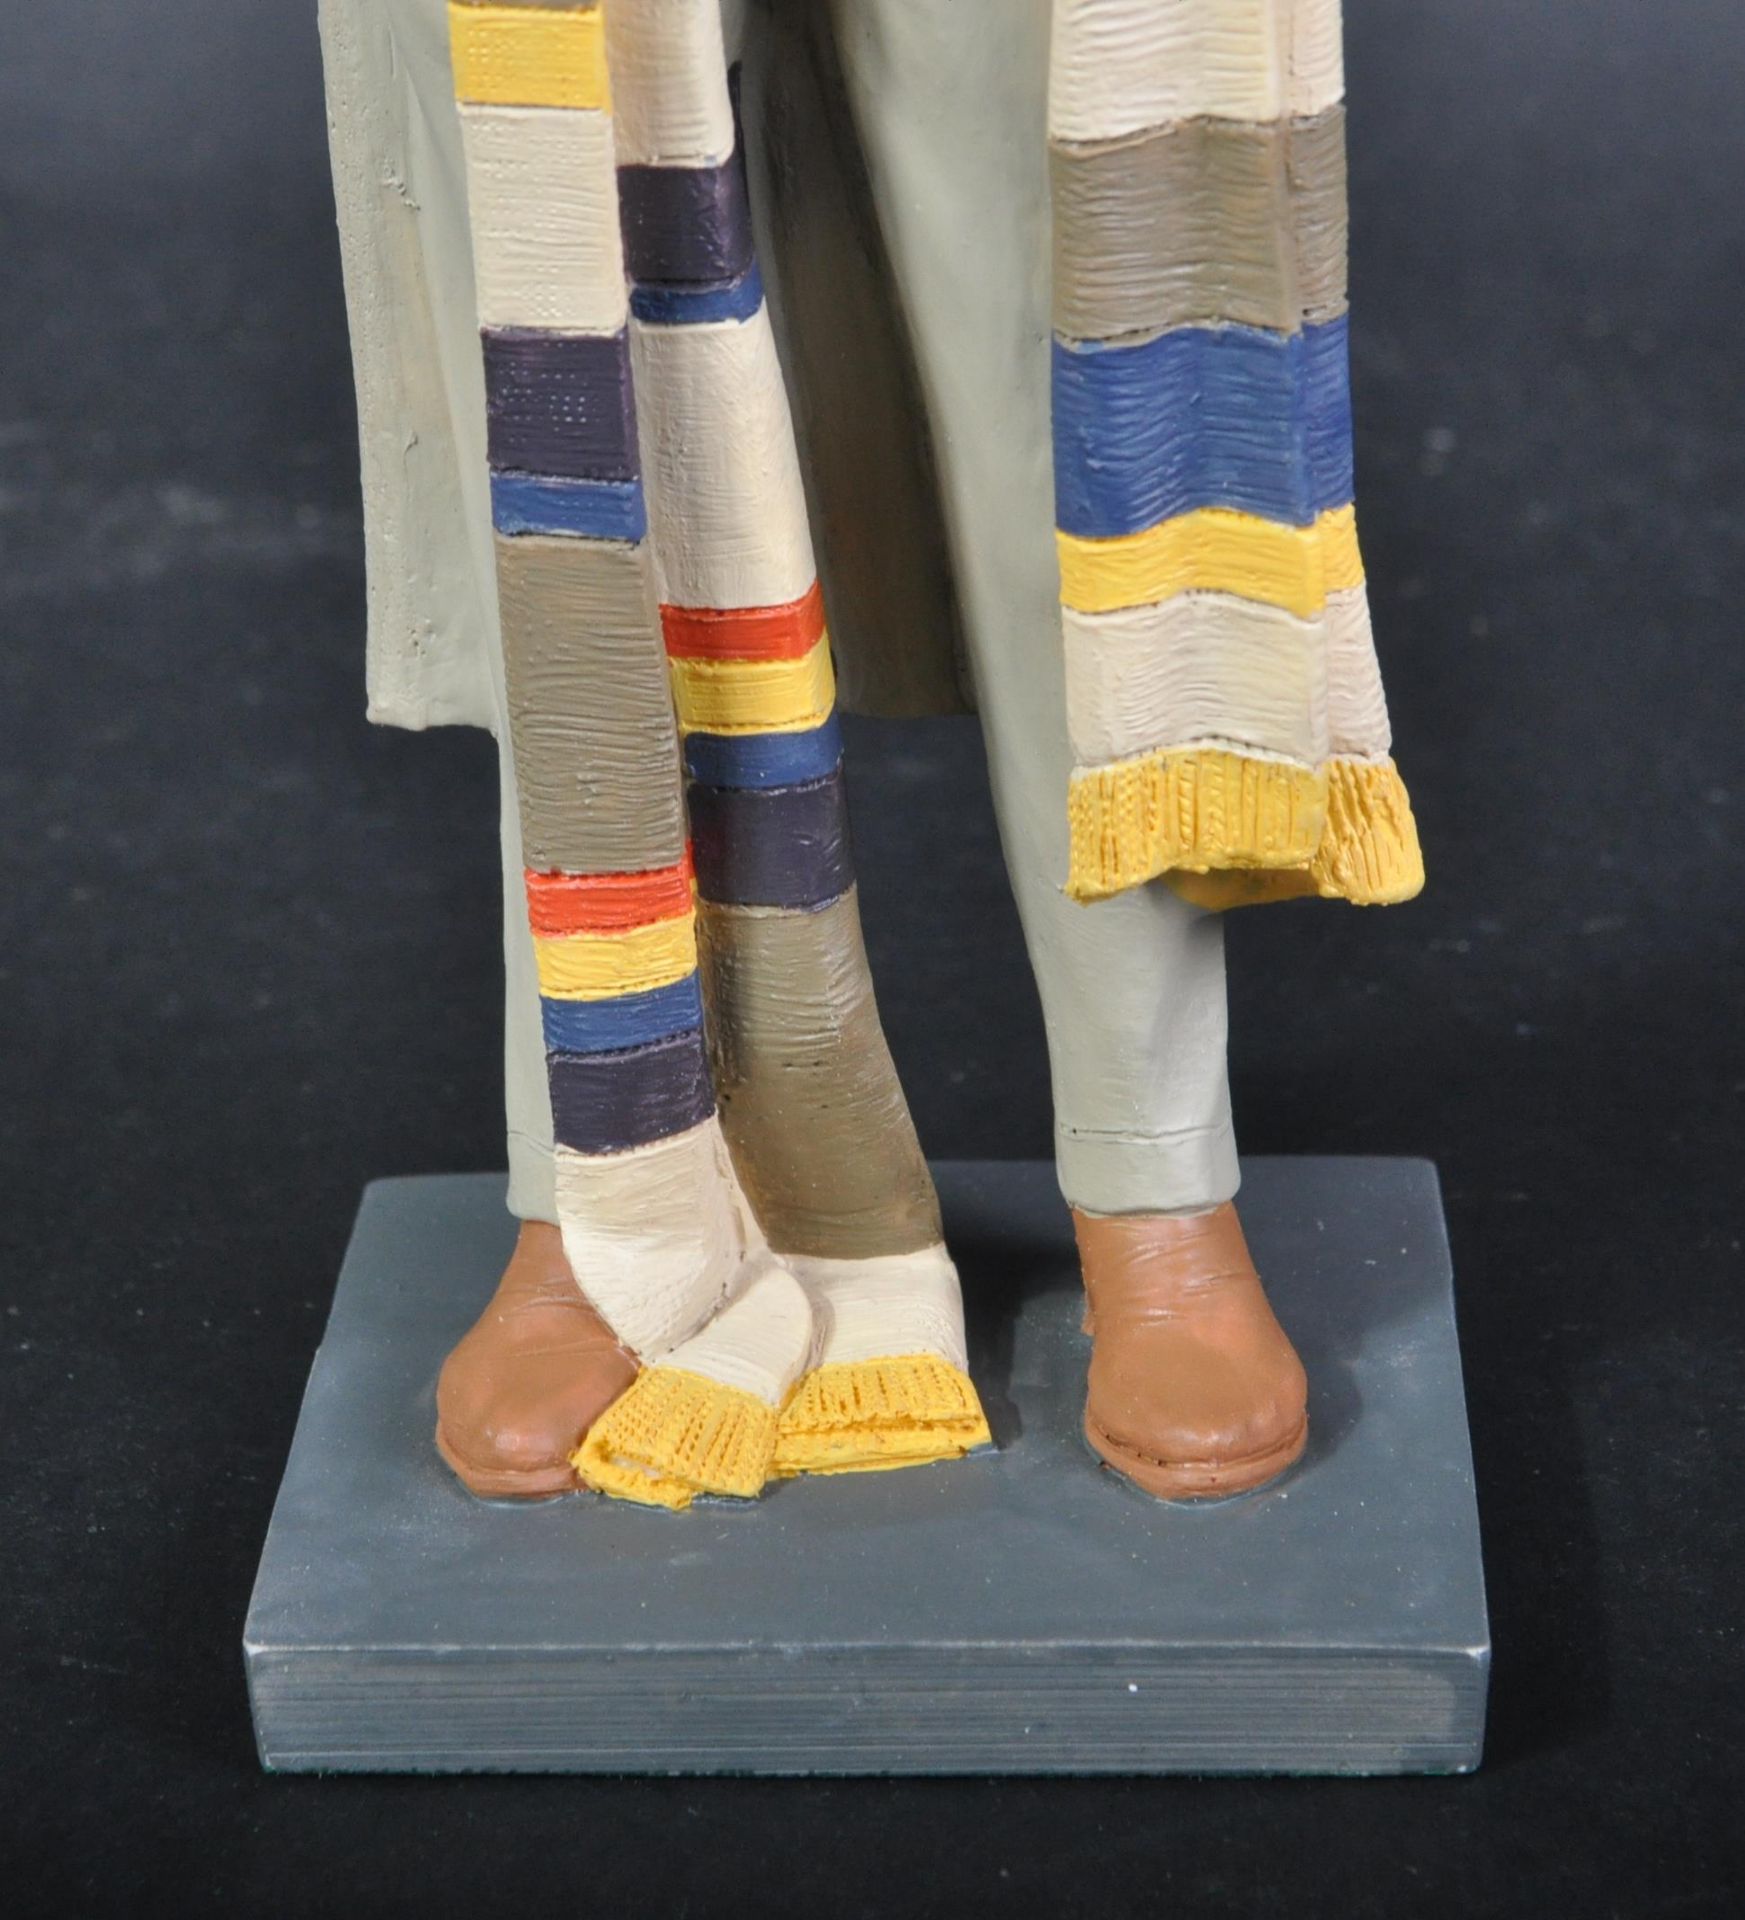 DOCTOR WHO - LARGE SCALE RESIN STATUE OF FOURTH DOCTOR TOM BAKER - Image 4 of 7